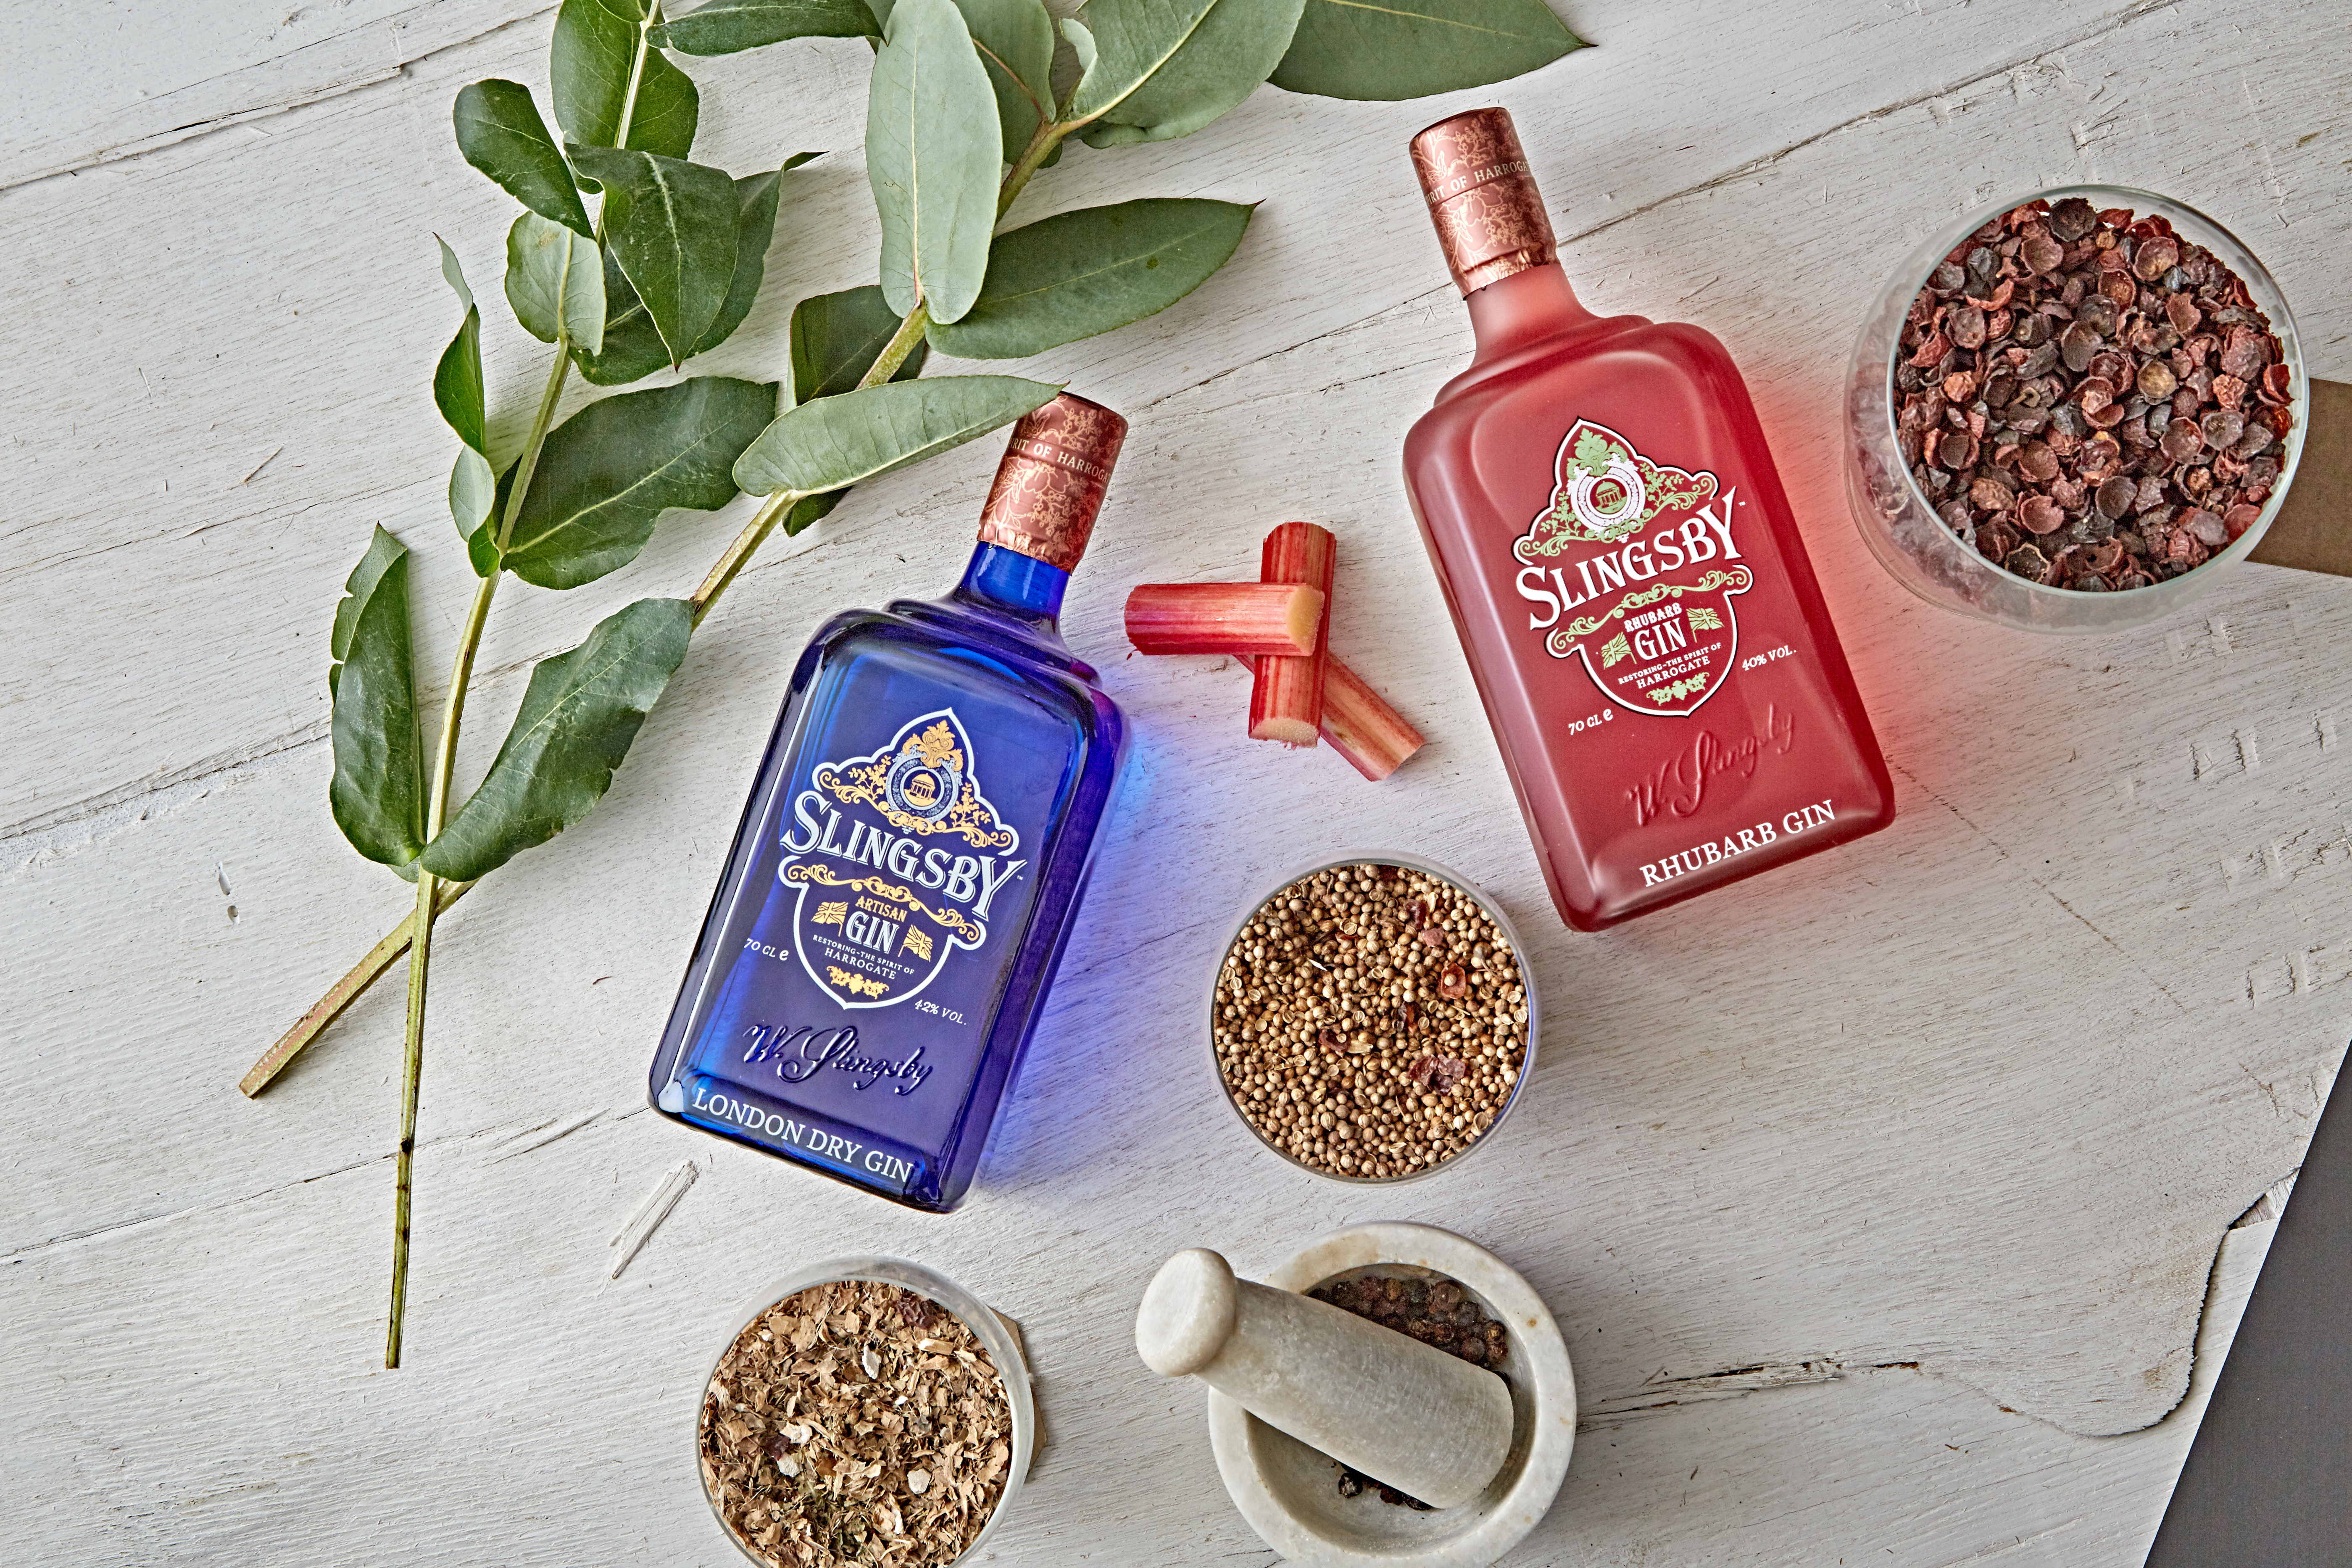 Introducing Slingsby Gin